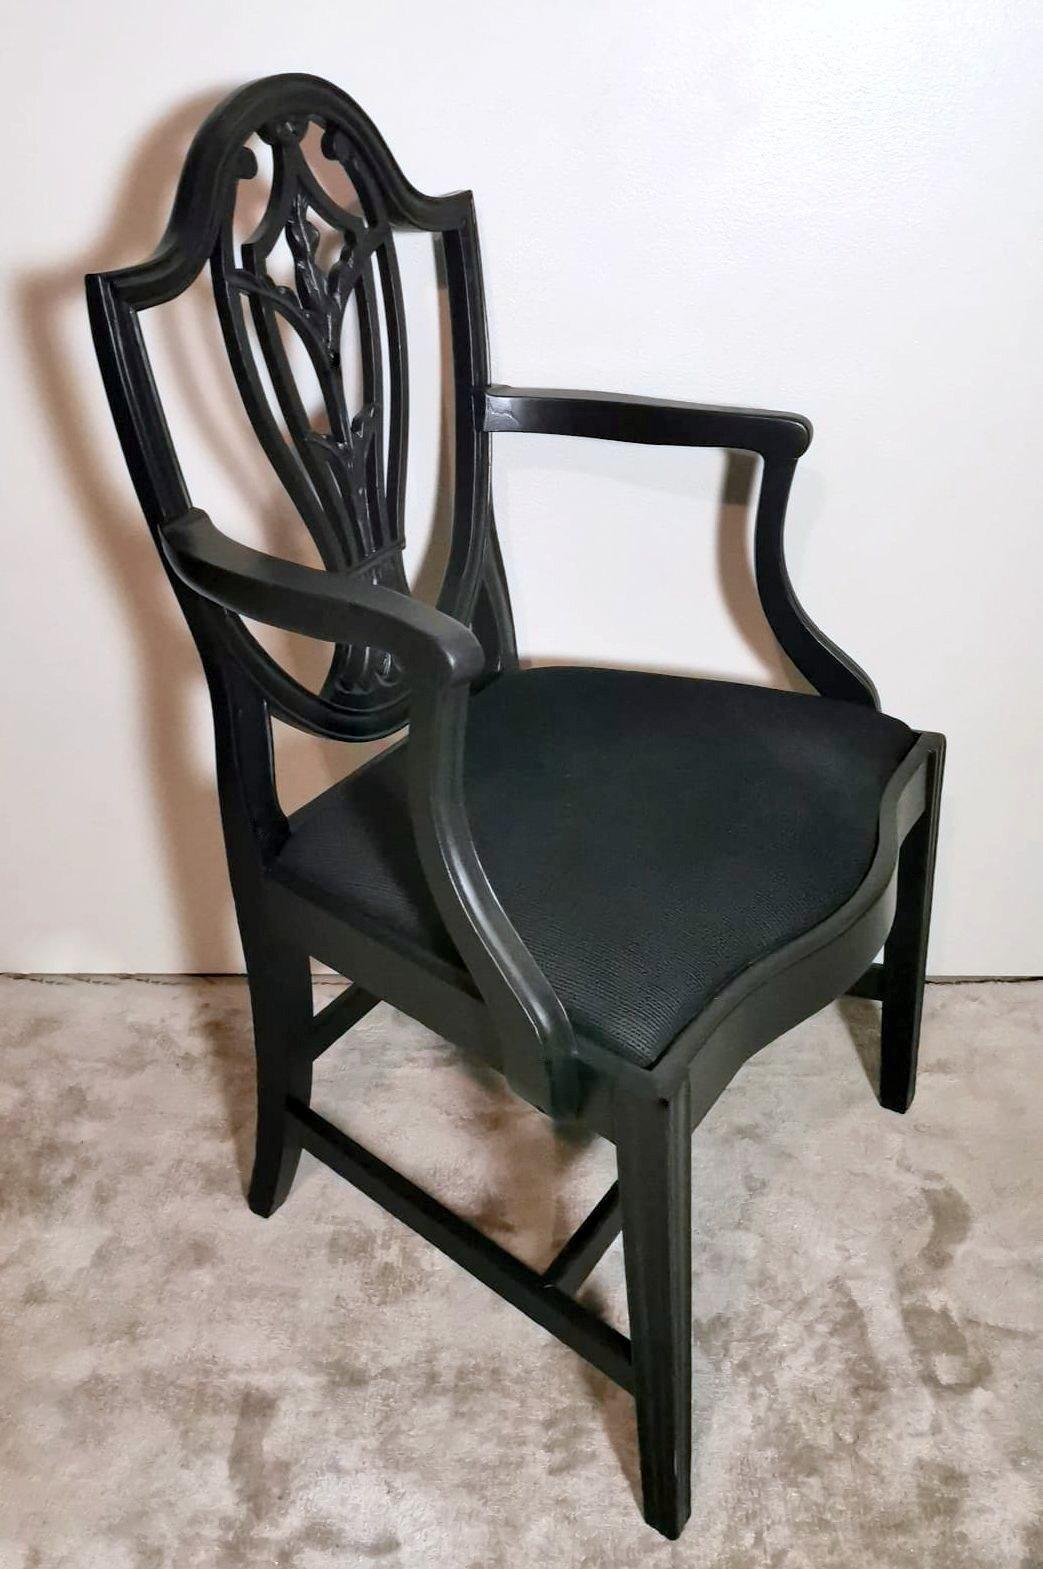 We kindly suggest that you read the entire description, as with it we try to give you detailed technical and historical information to ensure the authenticity of our objects.
Iconic and elegant English King (Antique Master) chair for the walnut and